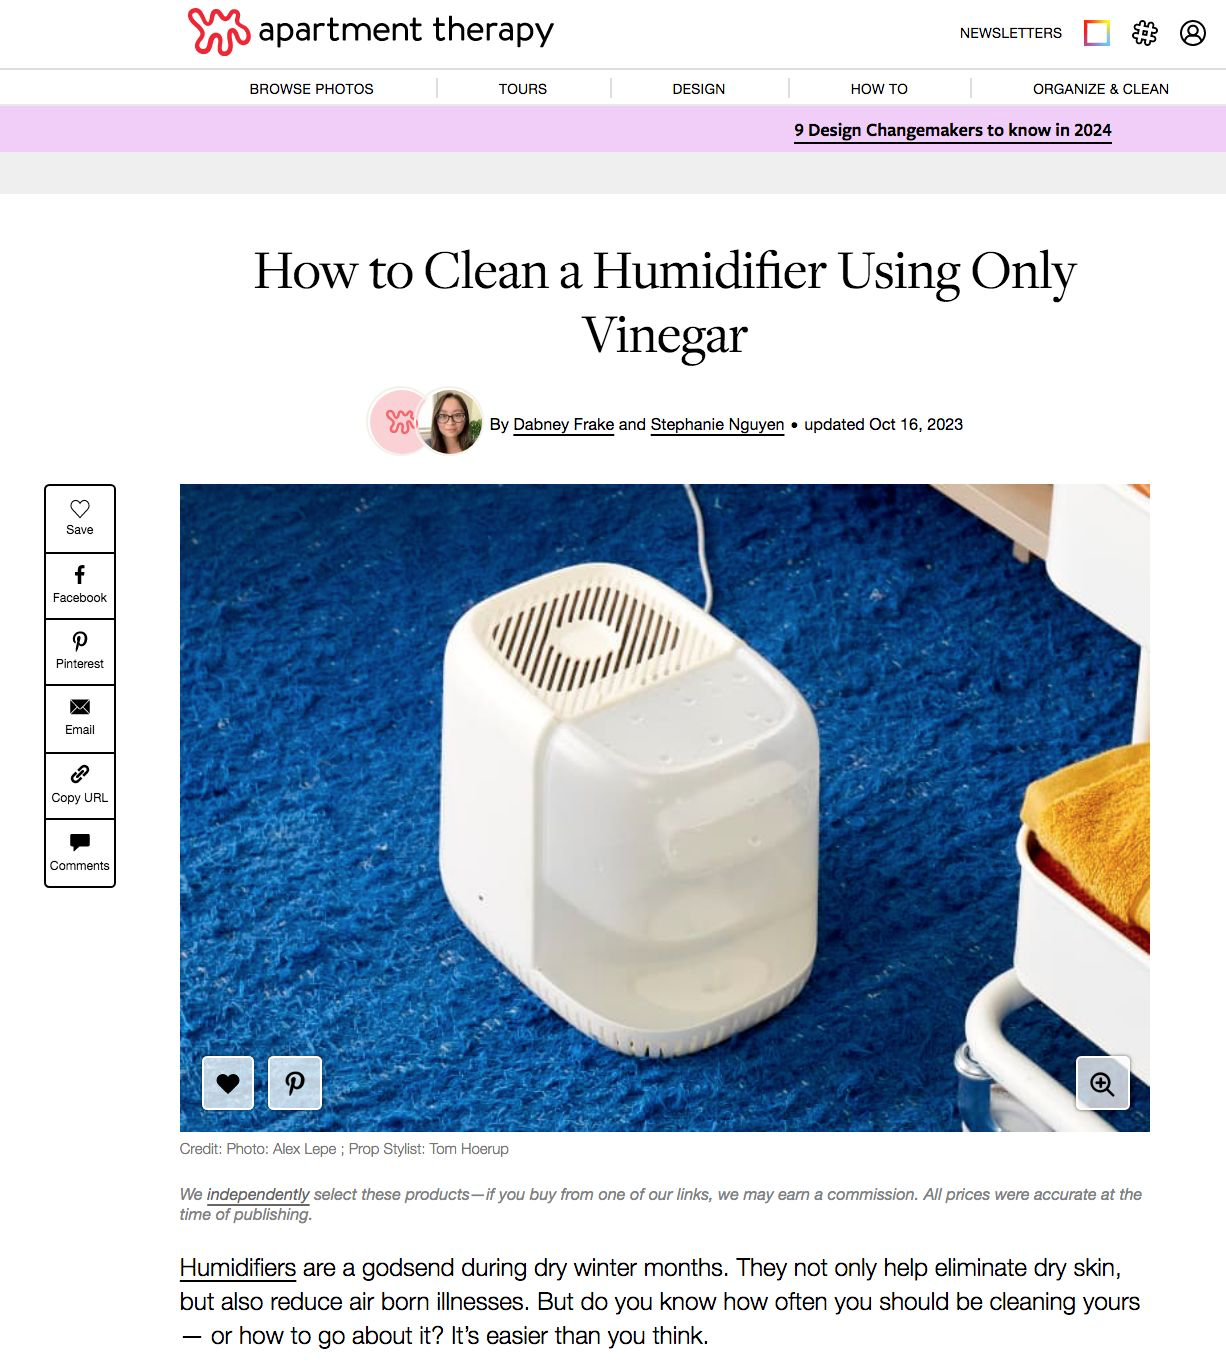 Apartment Therapy's blog post on how to clean a humidifier using only vinegar